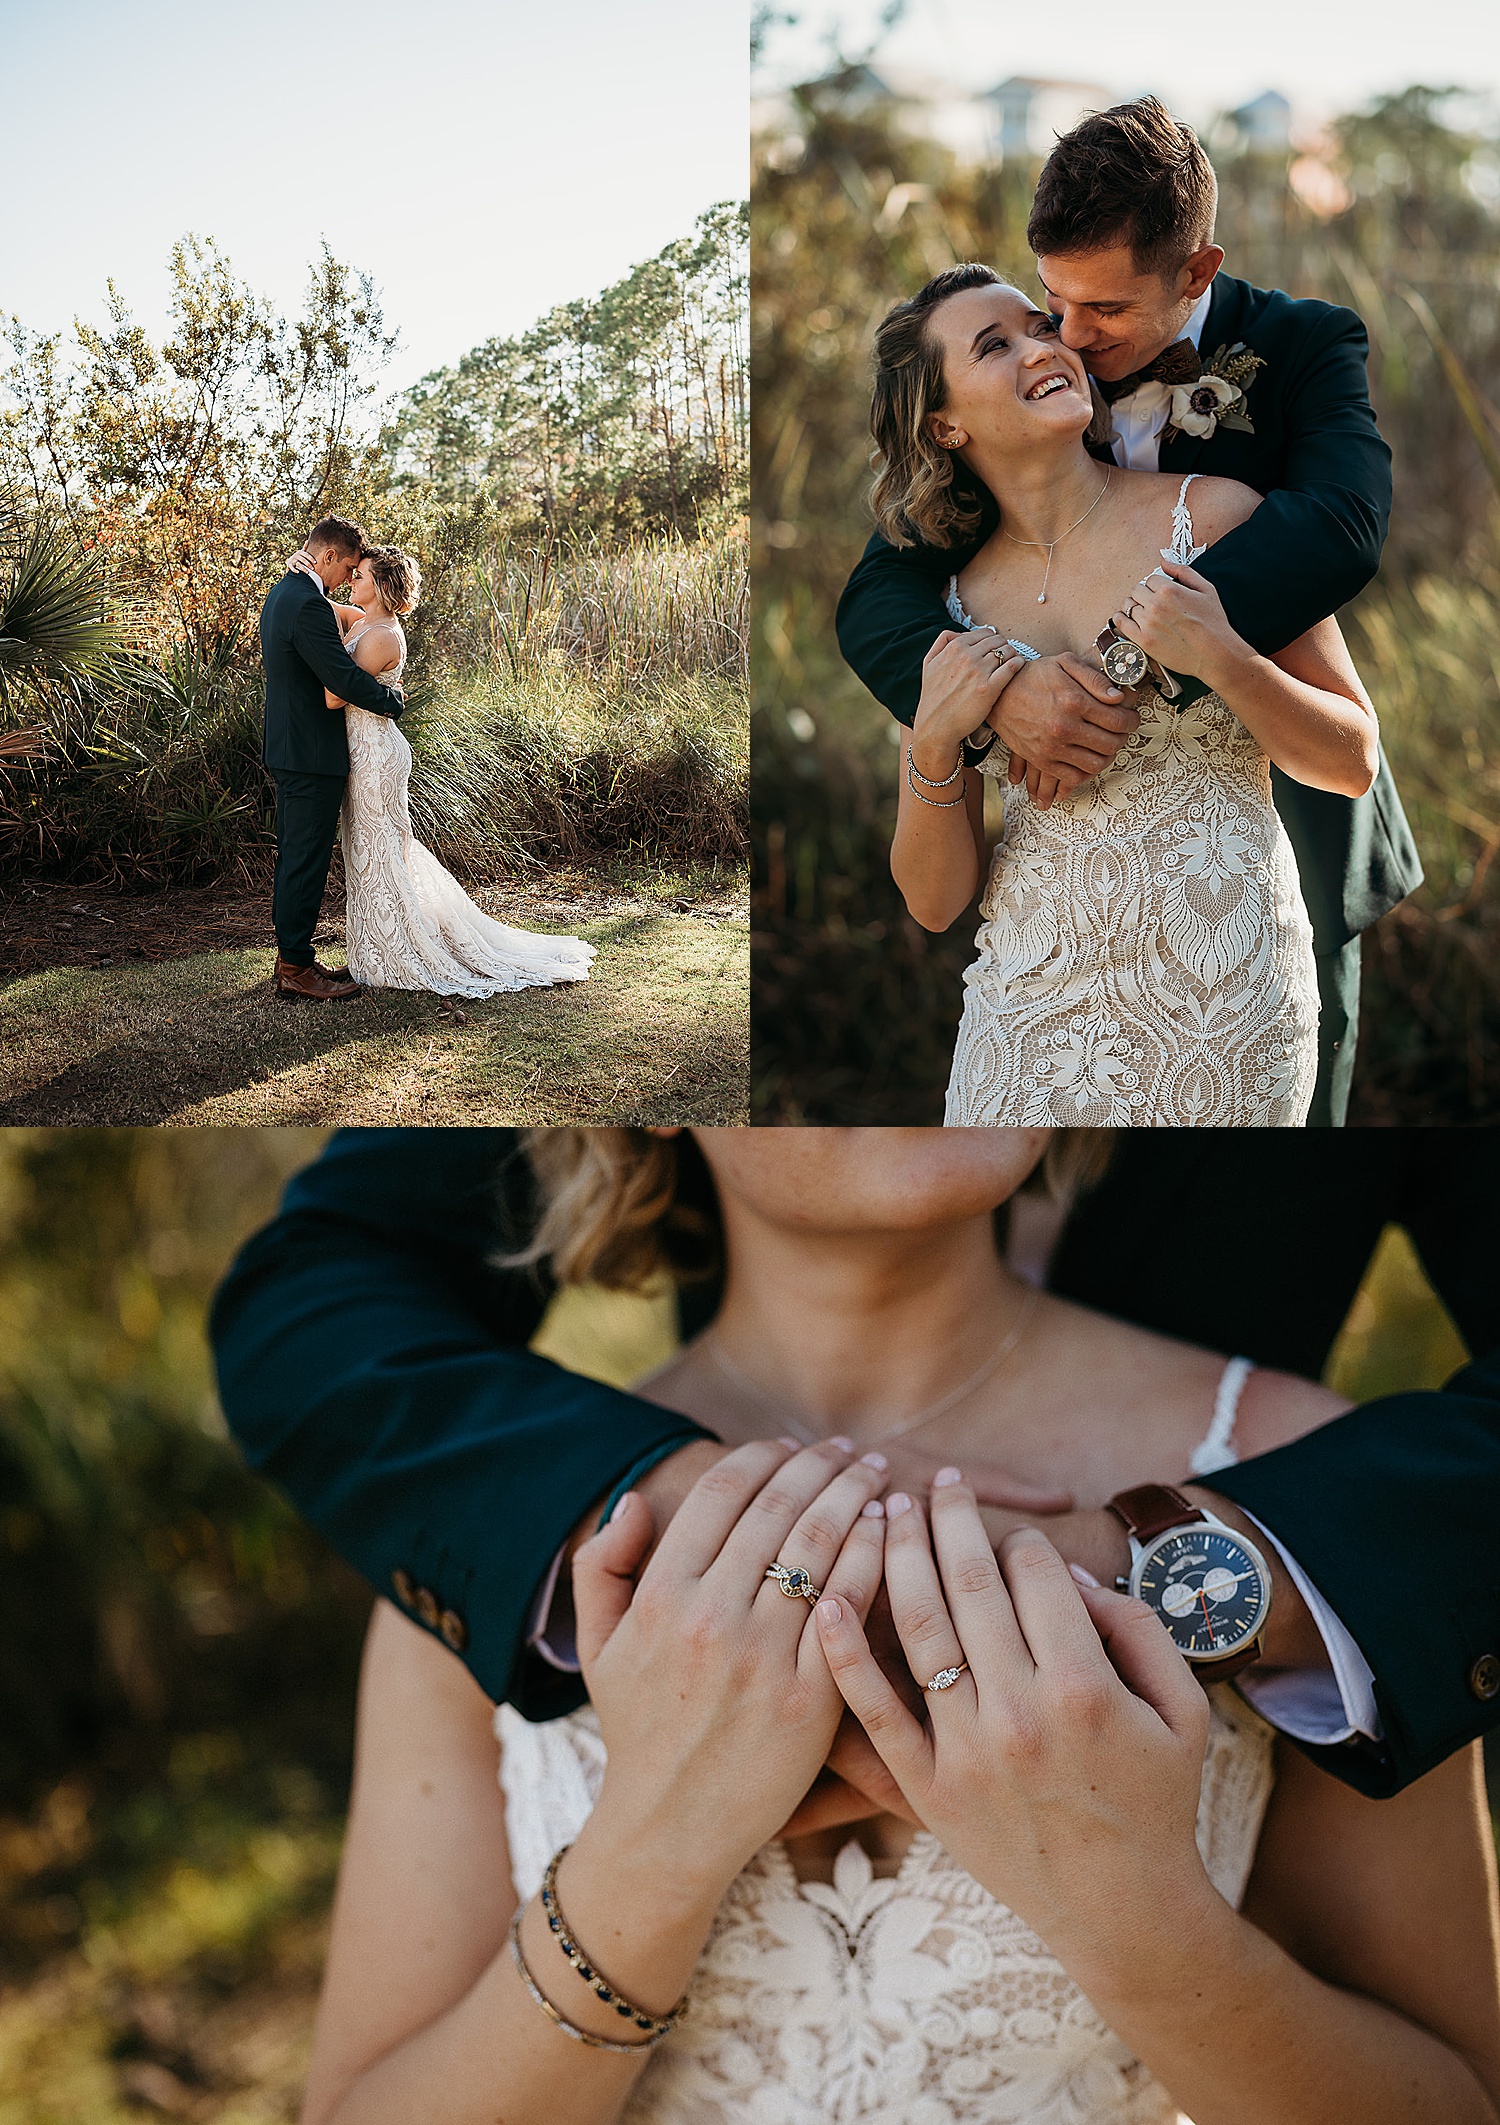 Groom wearing bowtie and a wrist watch at Carillon beach wedding